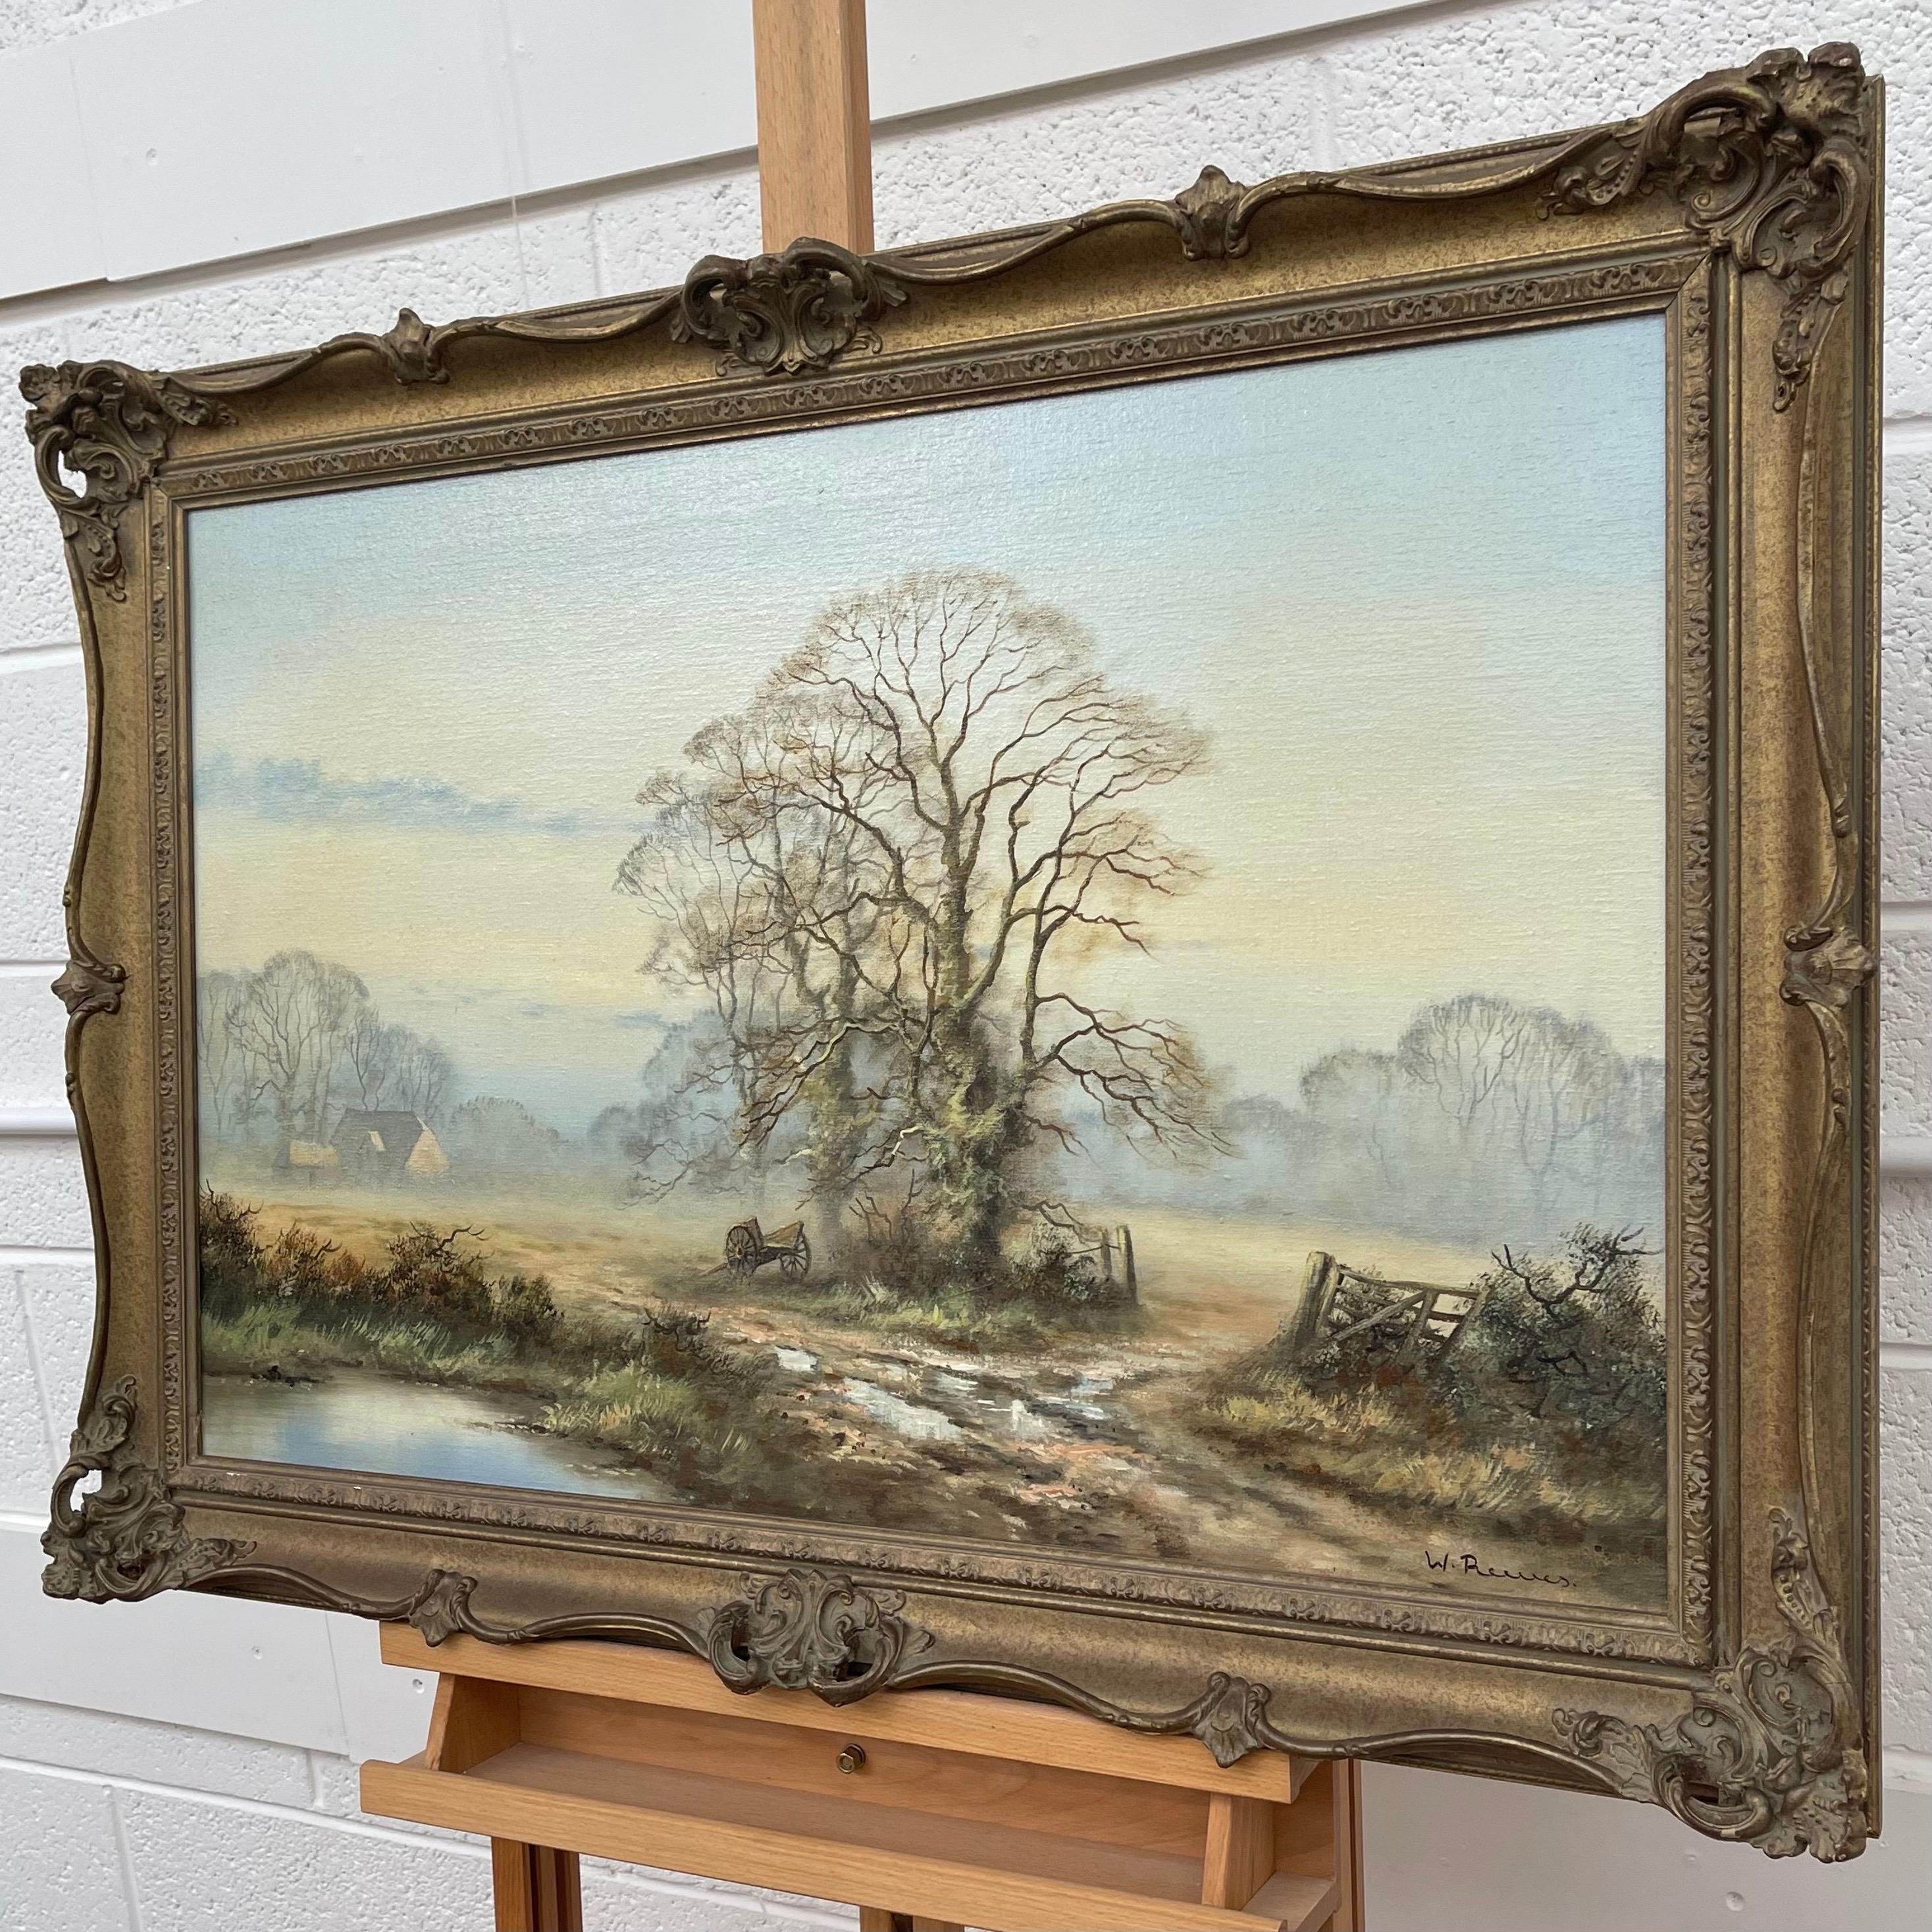 Oil Painting of Hay Cart in English Countryside by 20th Century British Artist Wendy Reeves. 

Art measures 30 x 20 inches
Frame measures 36 x 26 inches (original period ornate frame) 

Wendy Reeves garnered acclaim for her Scottish Highland and